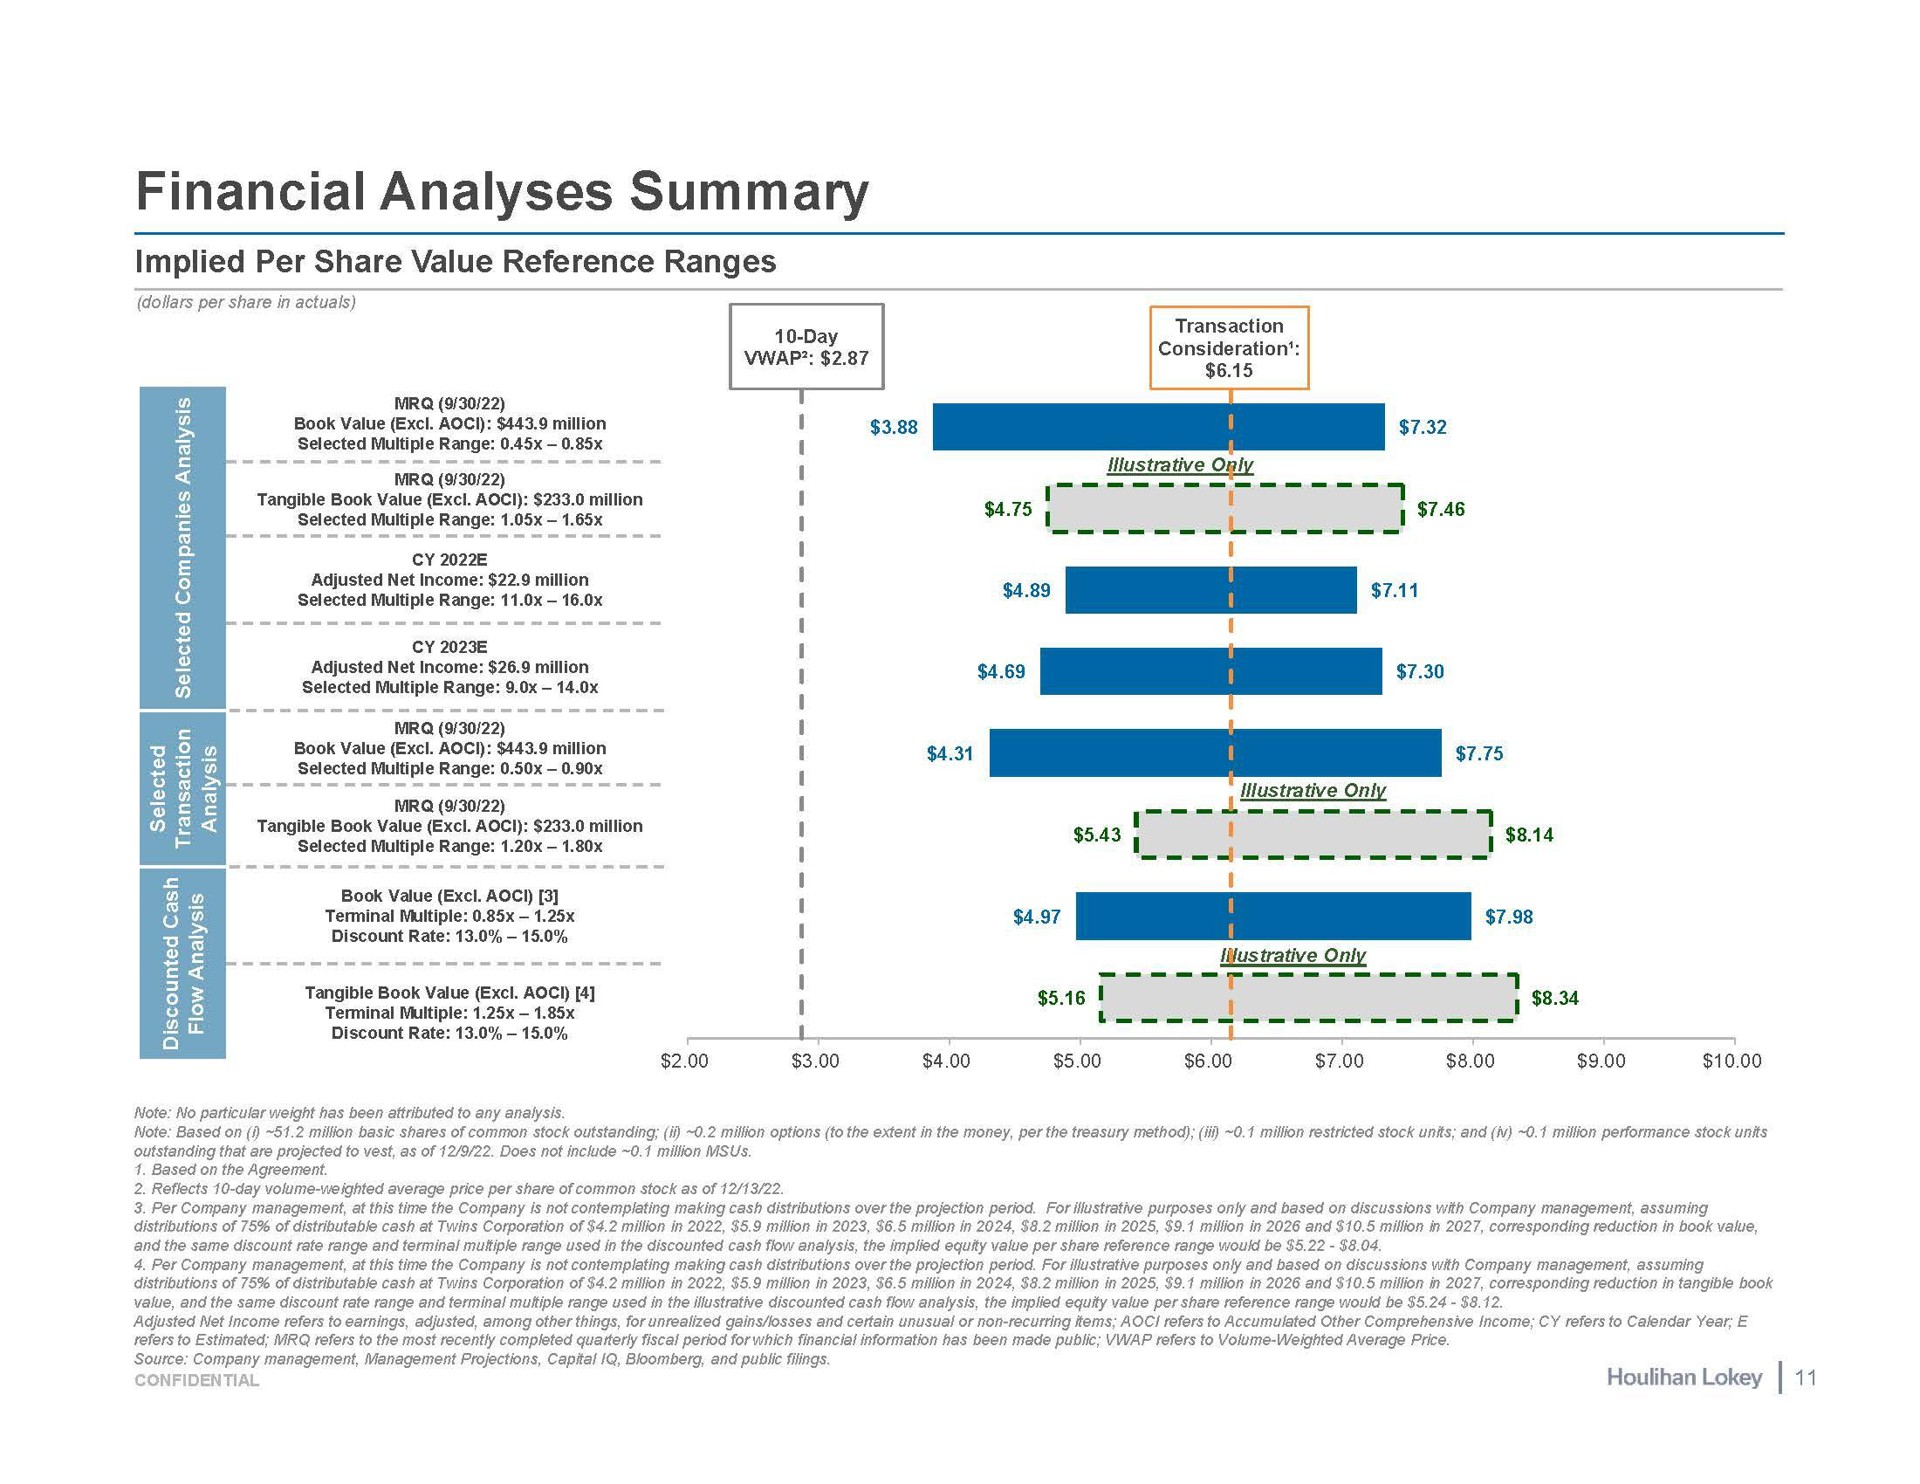 financial analyses summary implied per share value reference ranges a | Houlihan Lokey